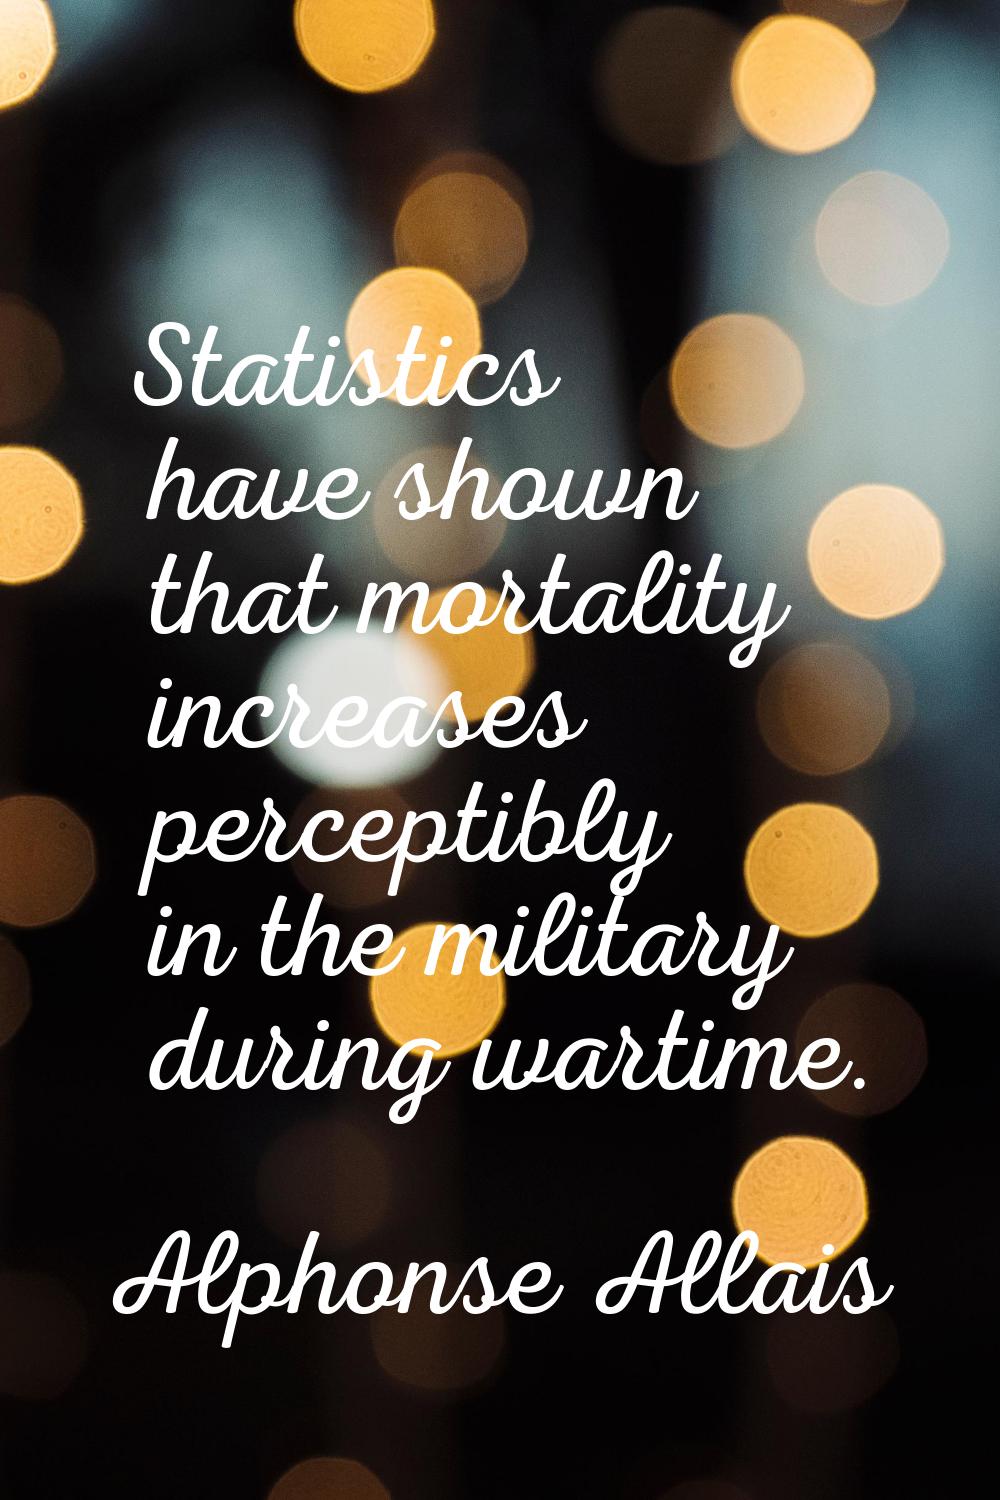 Statistics have shown that mortality increases perceptibly in the military during wartime.